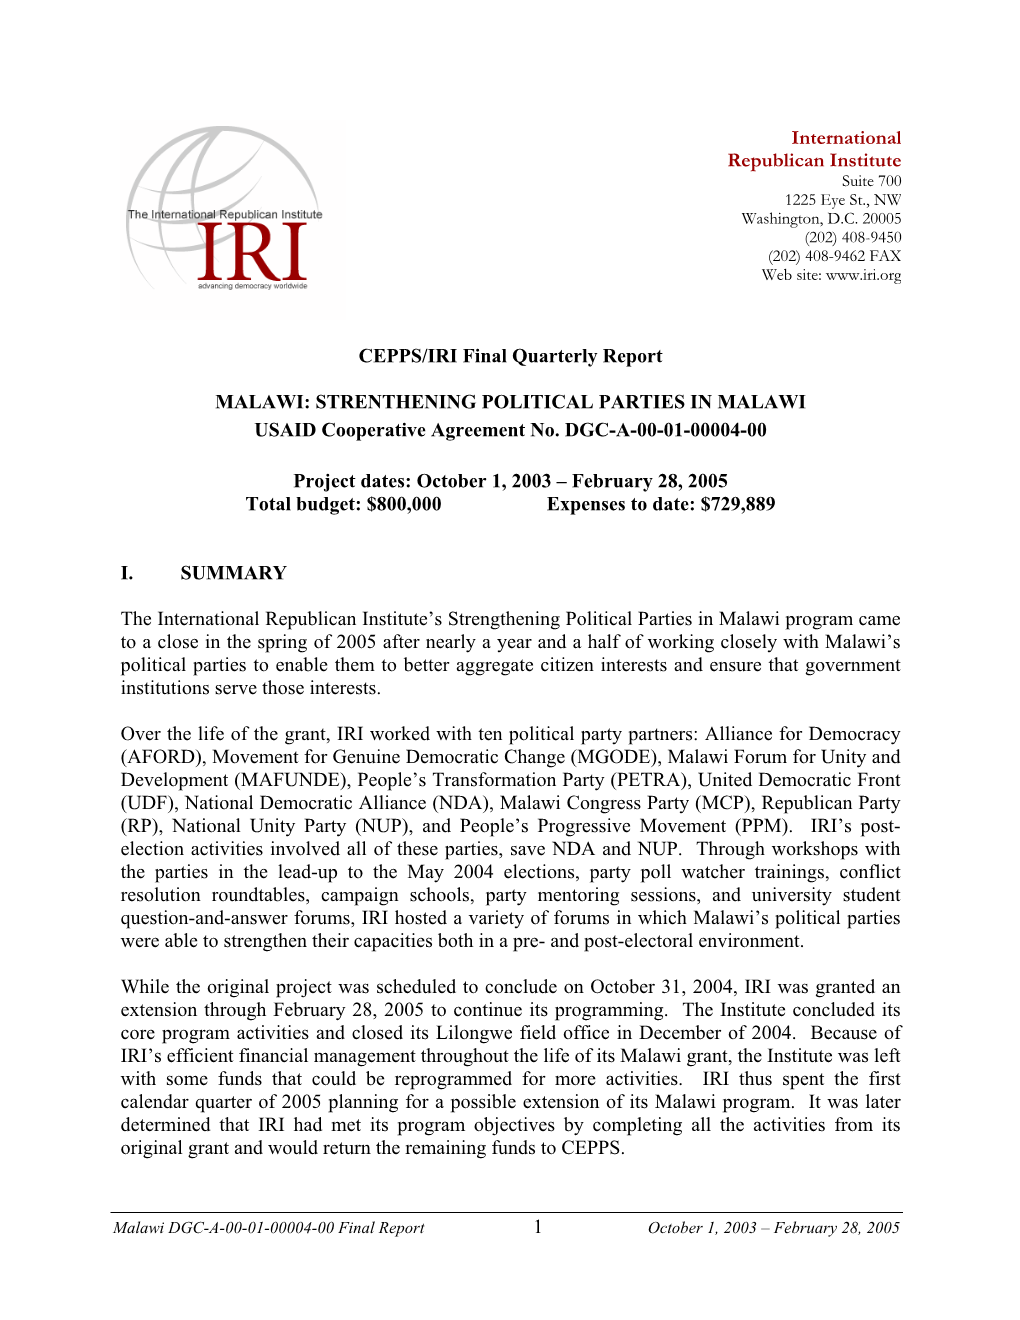 1 CEPPS/IRI Final Quarterly Report MALAWI: STRENTHENING POLITICAL PARTIES in MALAWI USAID Cooperative Agreement No. DGC-A-00-01